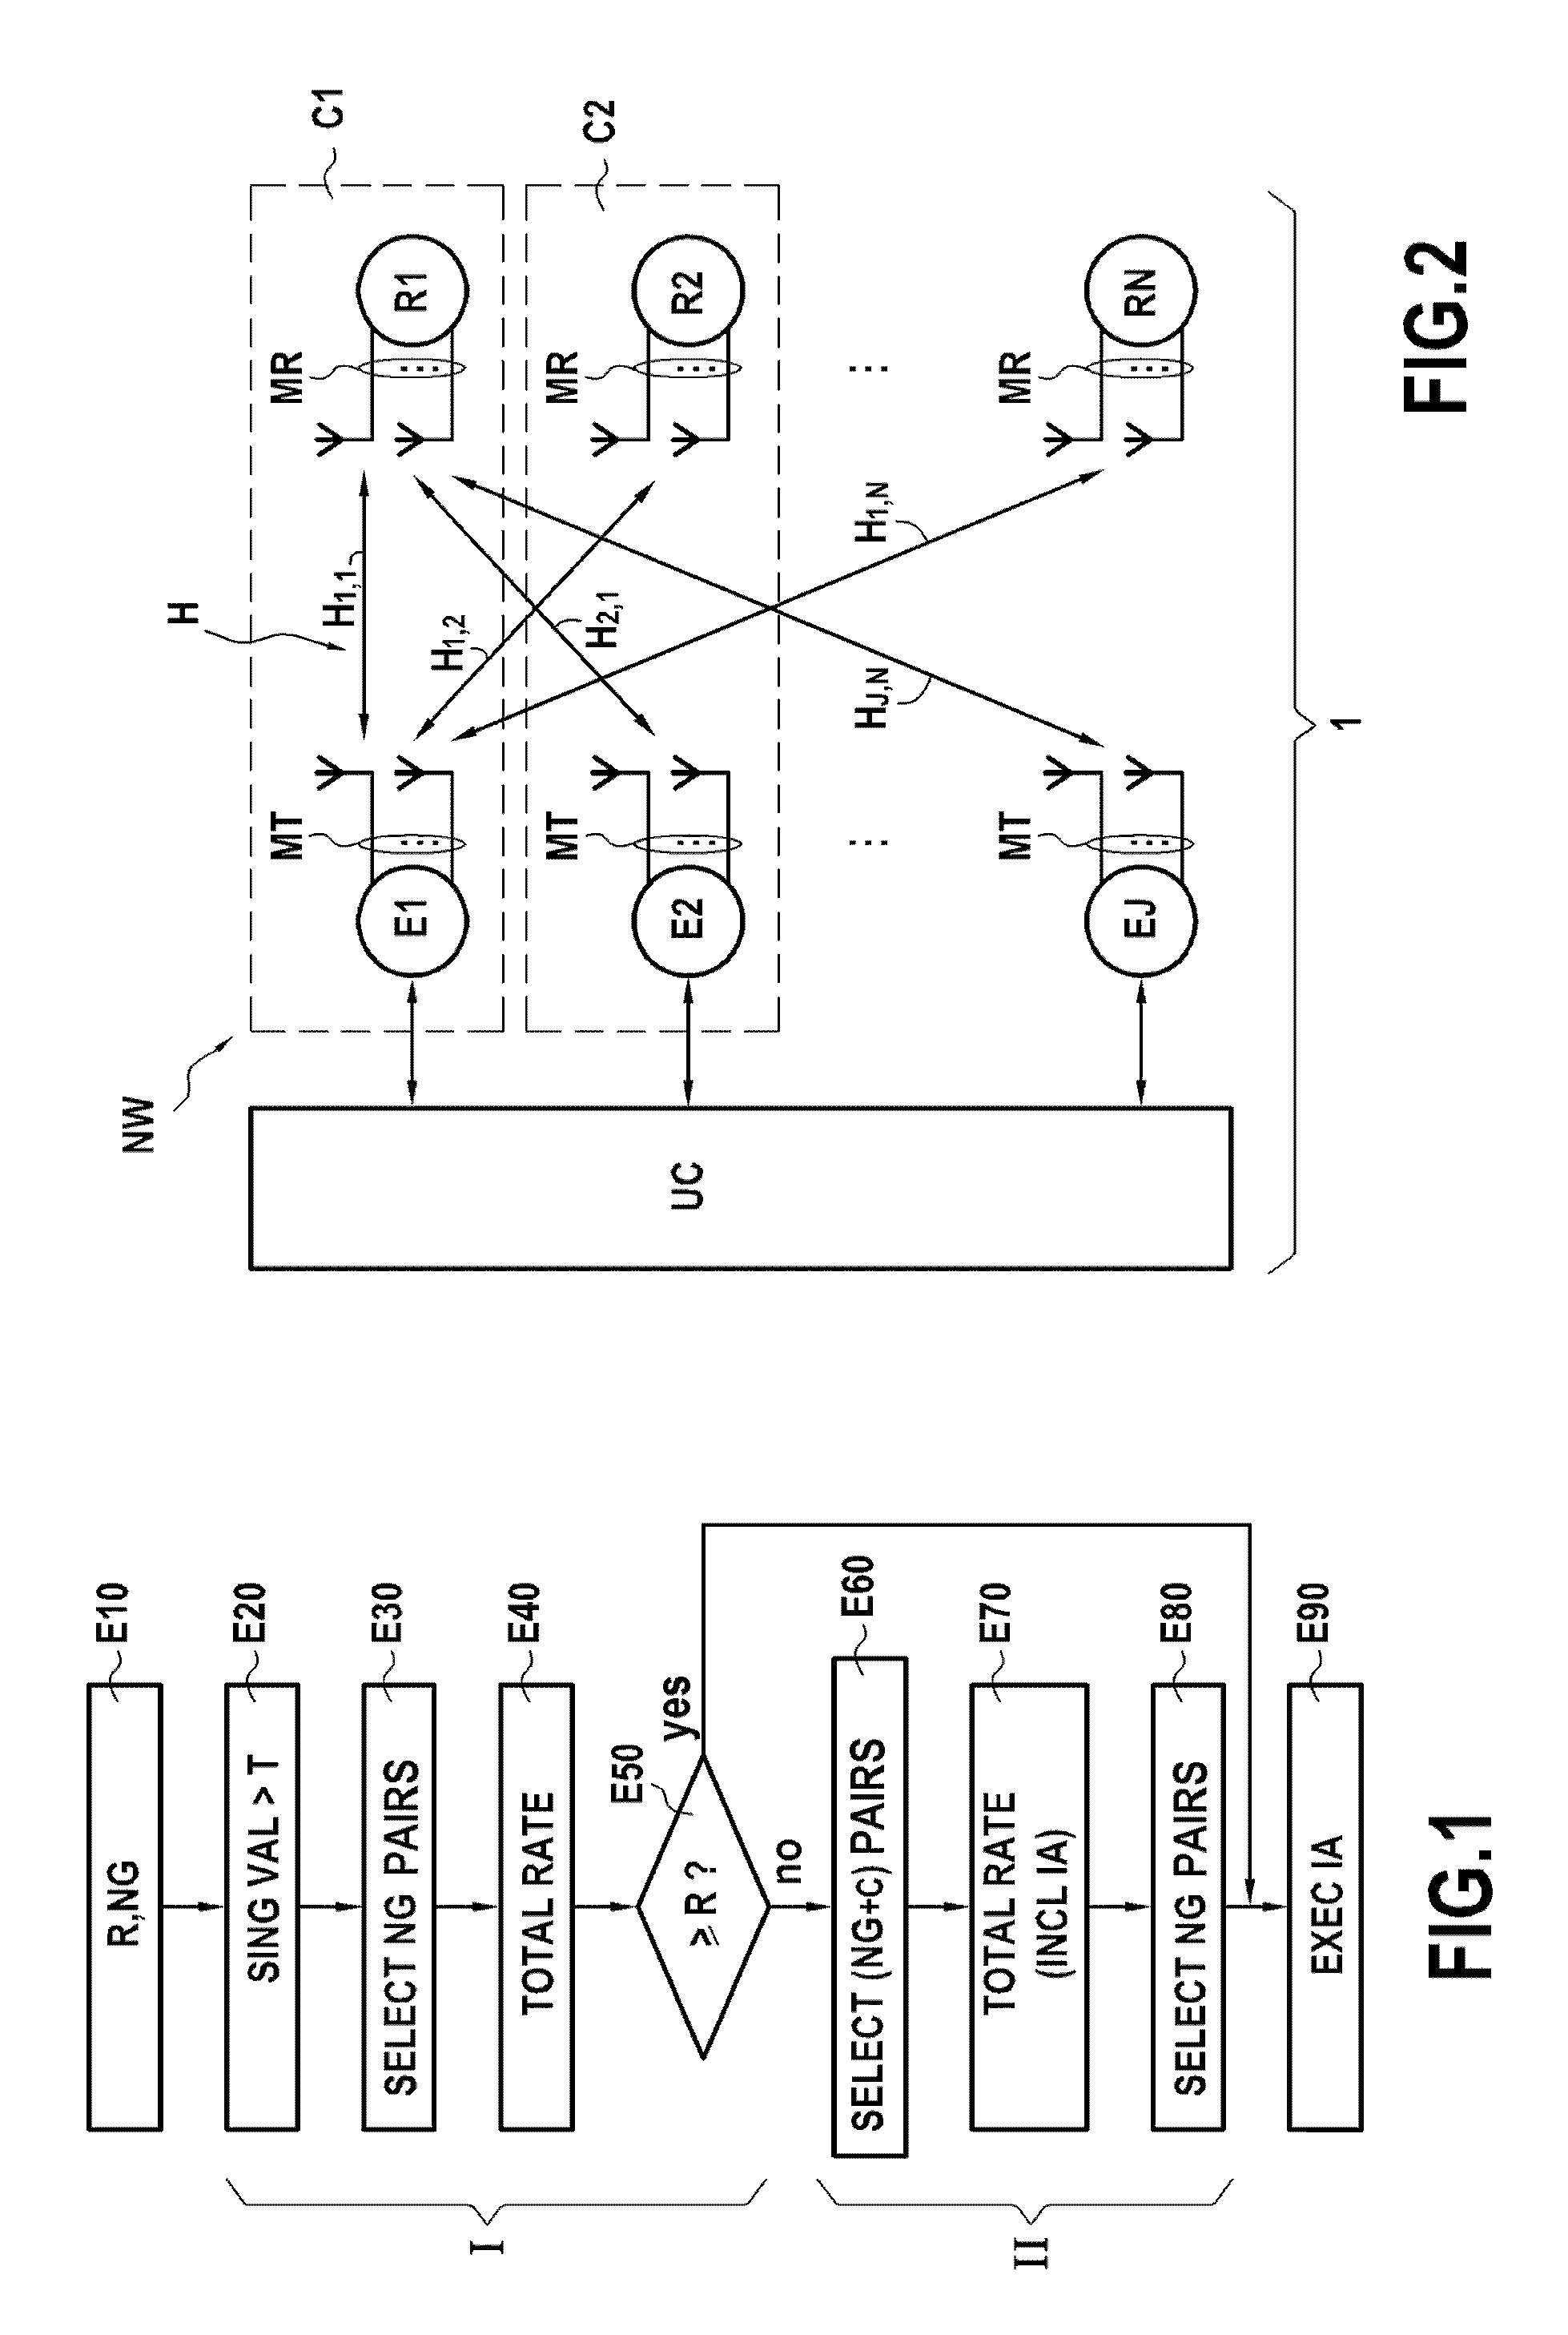 Method of grouping transmitter-receiver pairs for communicating over a communications network